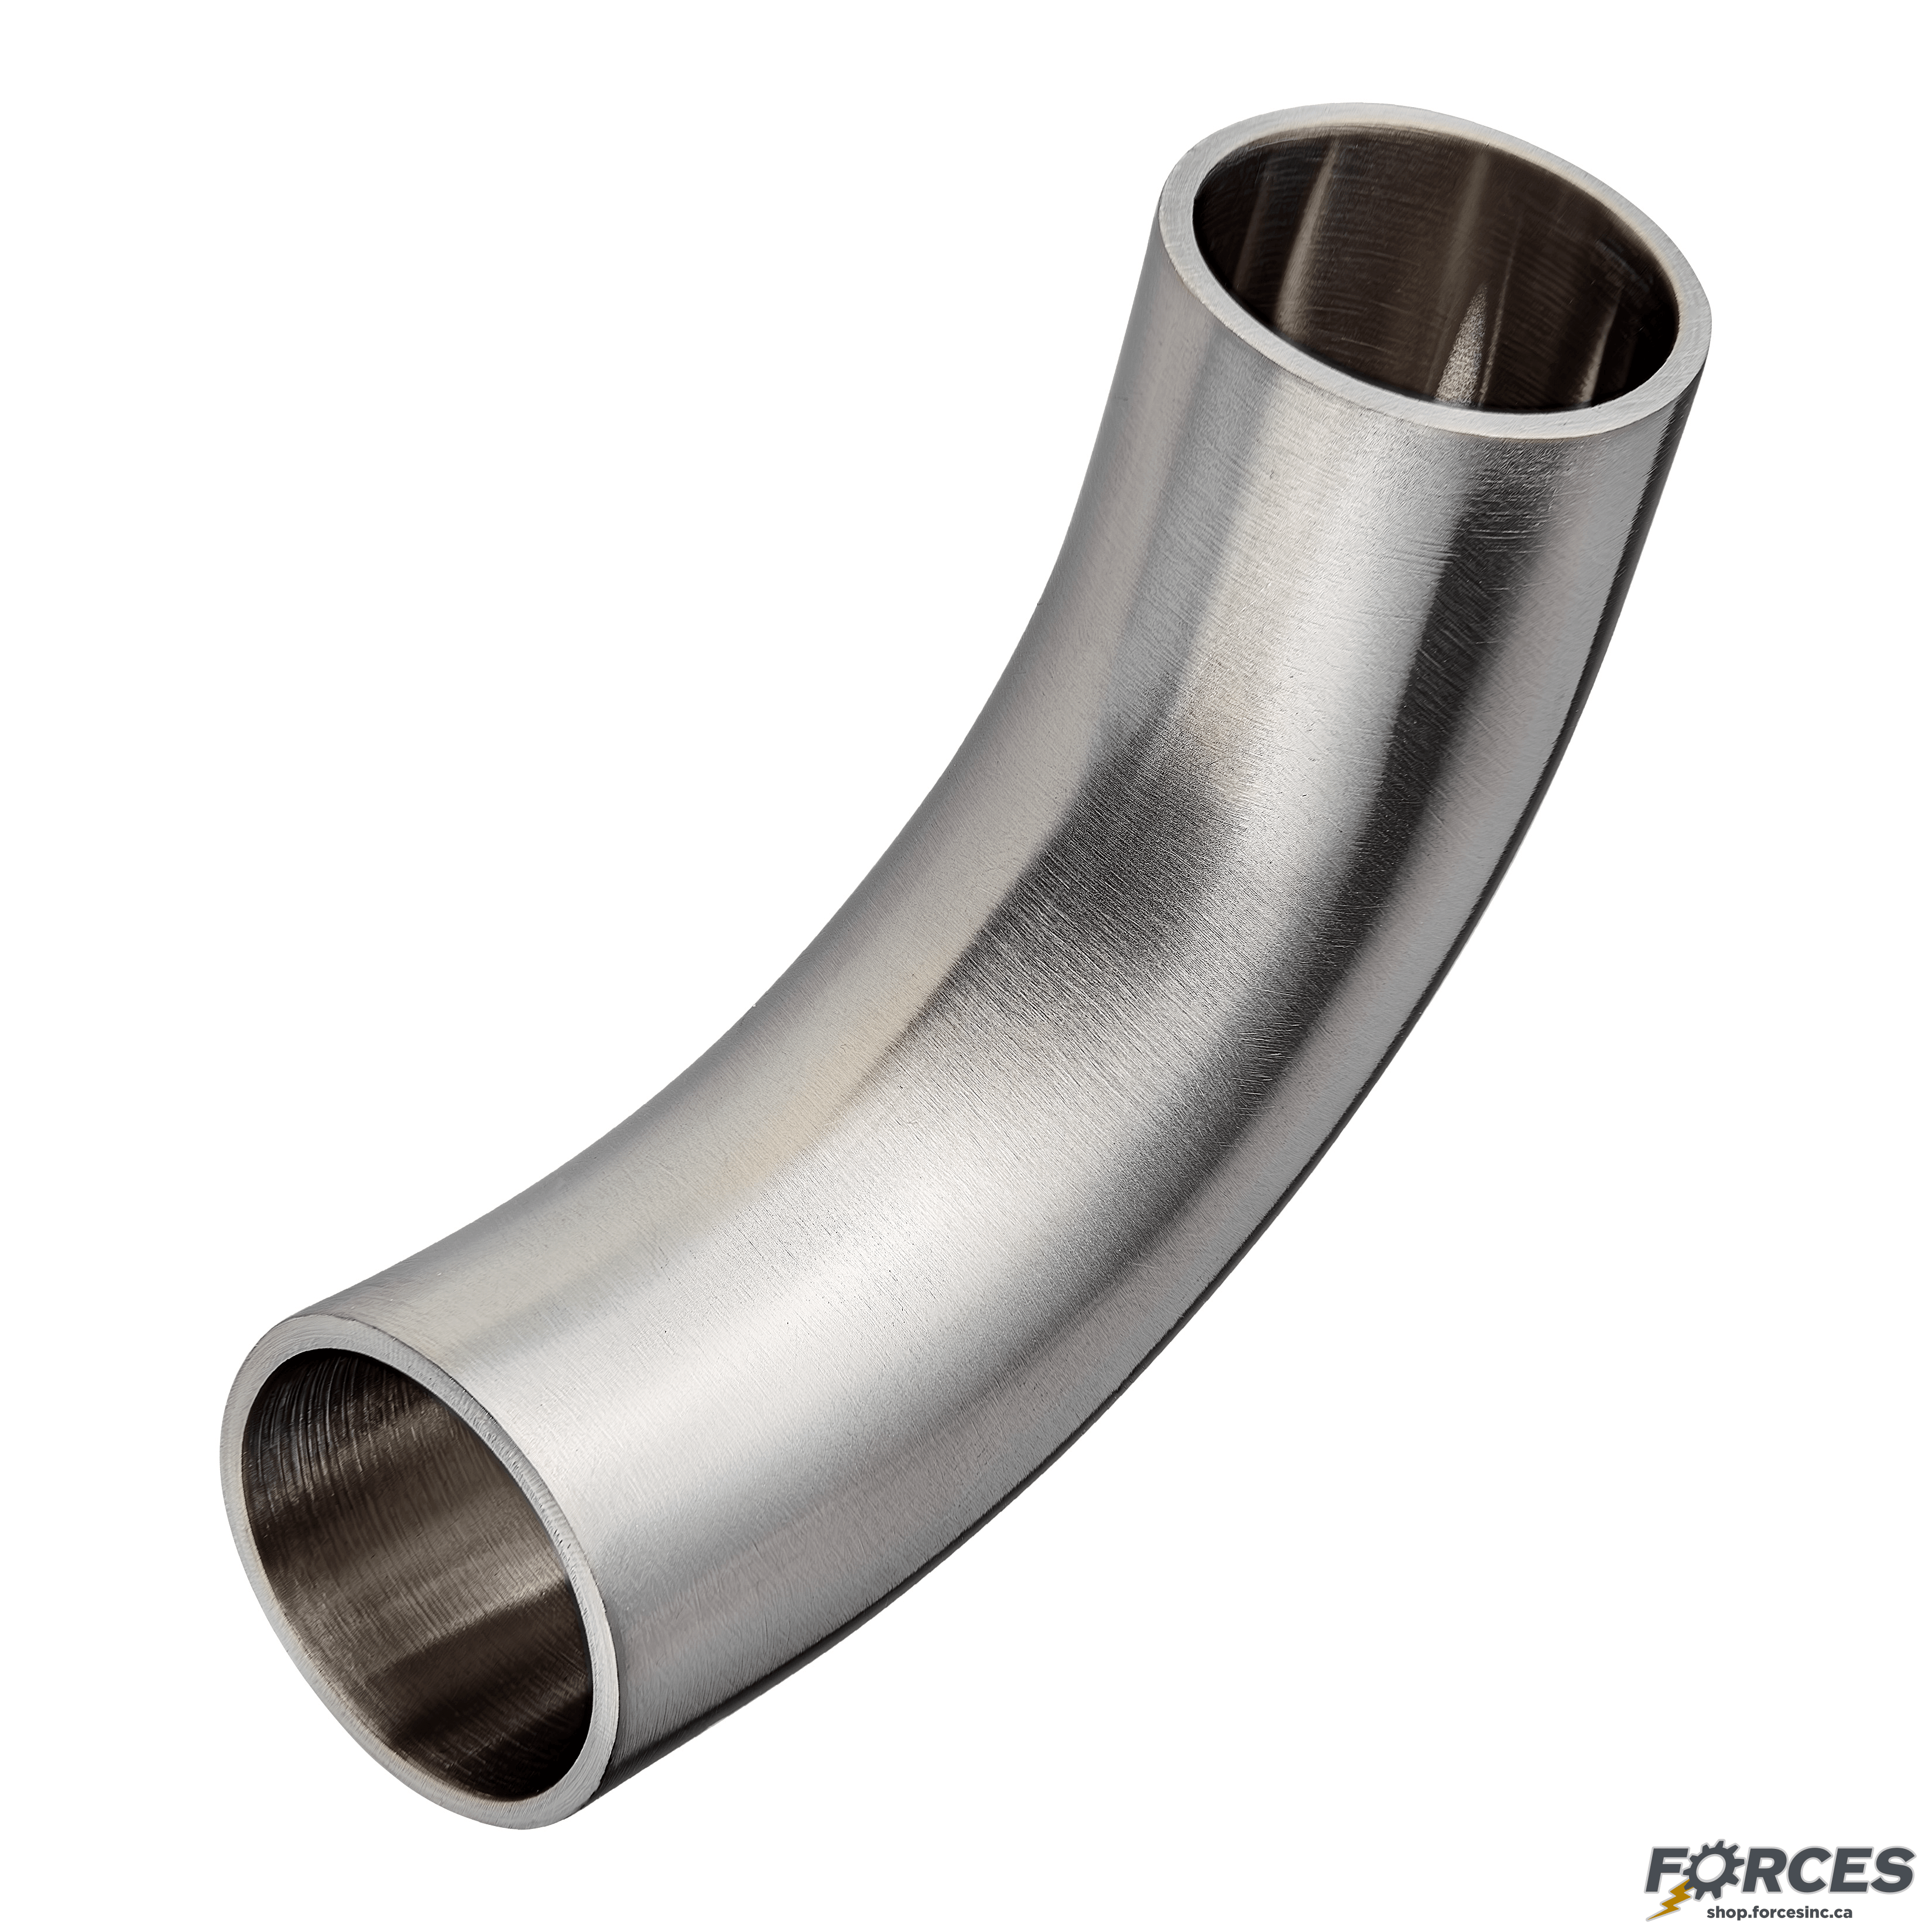 2" Butt Weld 90° Elbow Long Tangent - Stainless Steel 316 - Forces Inc